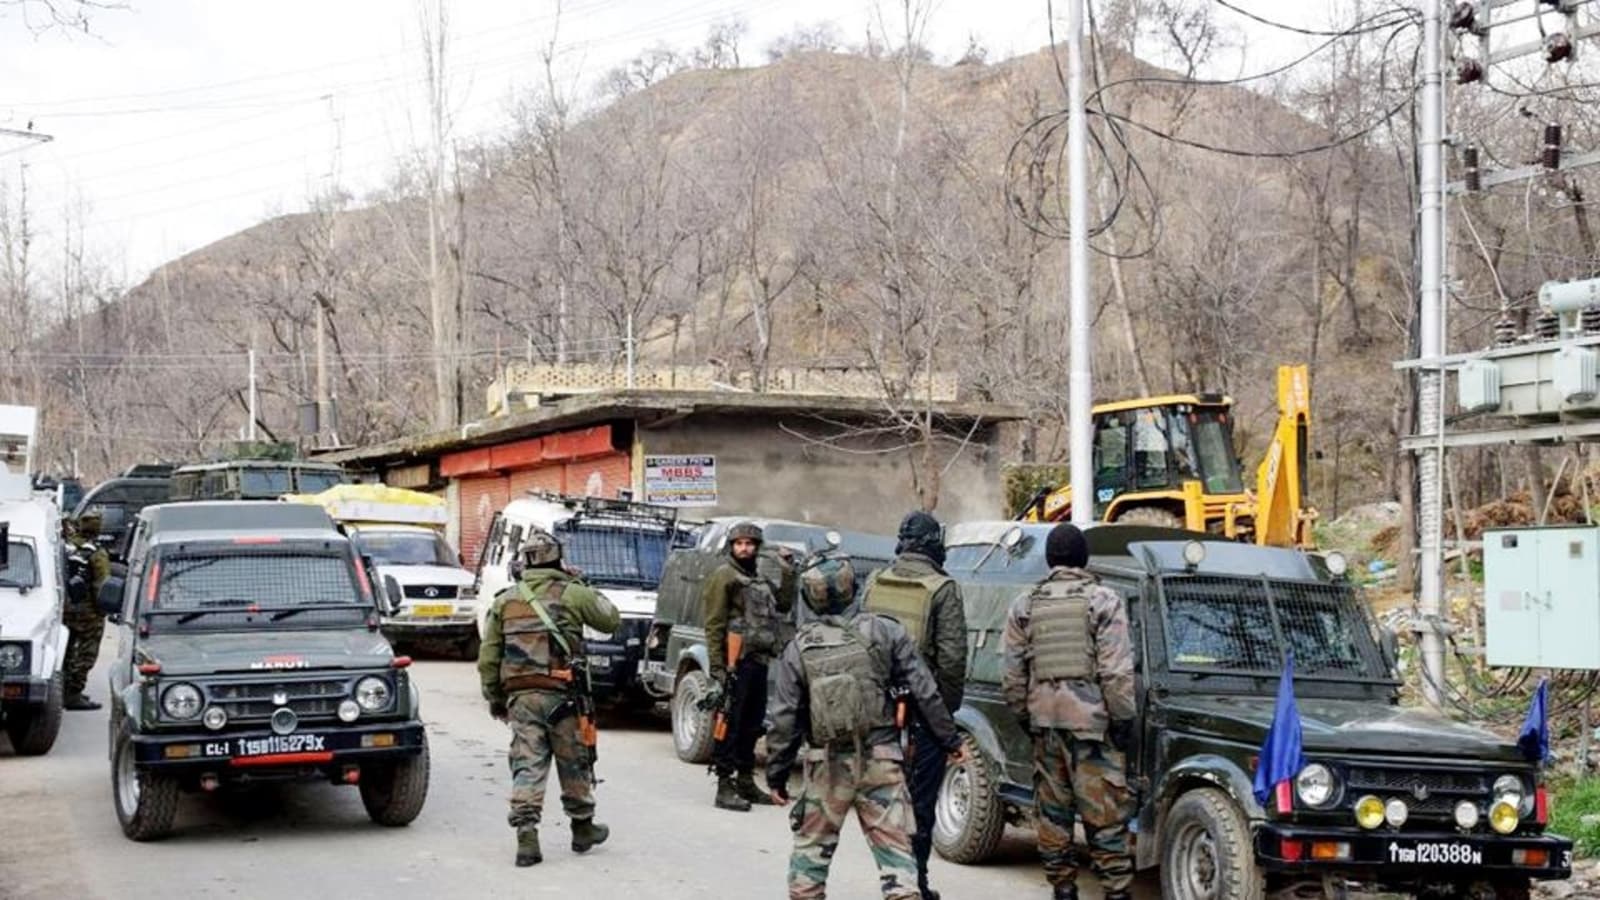 J&K police dismiss rumours of attack on CRPF bunker in Pulwama as ‘fake news’